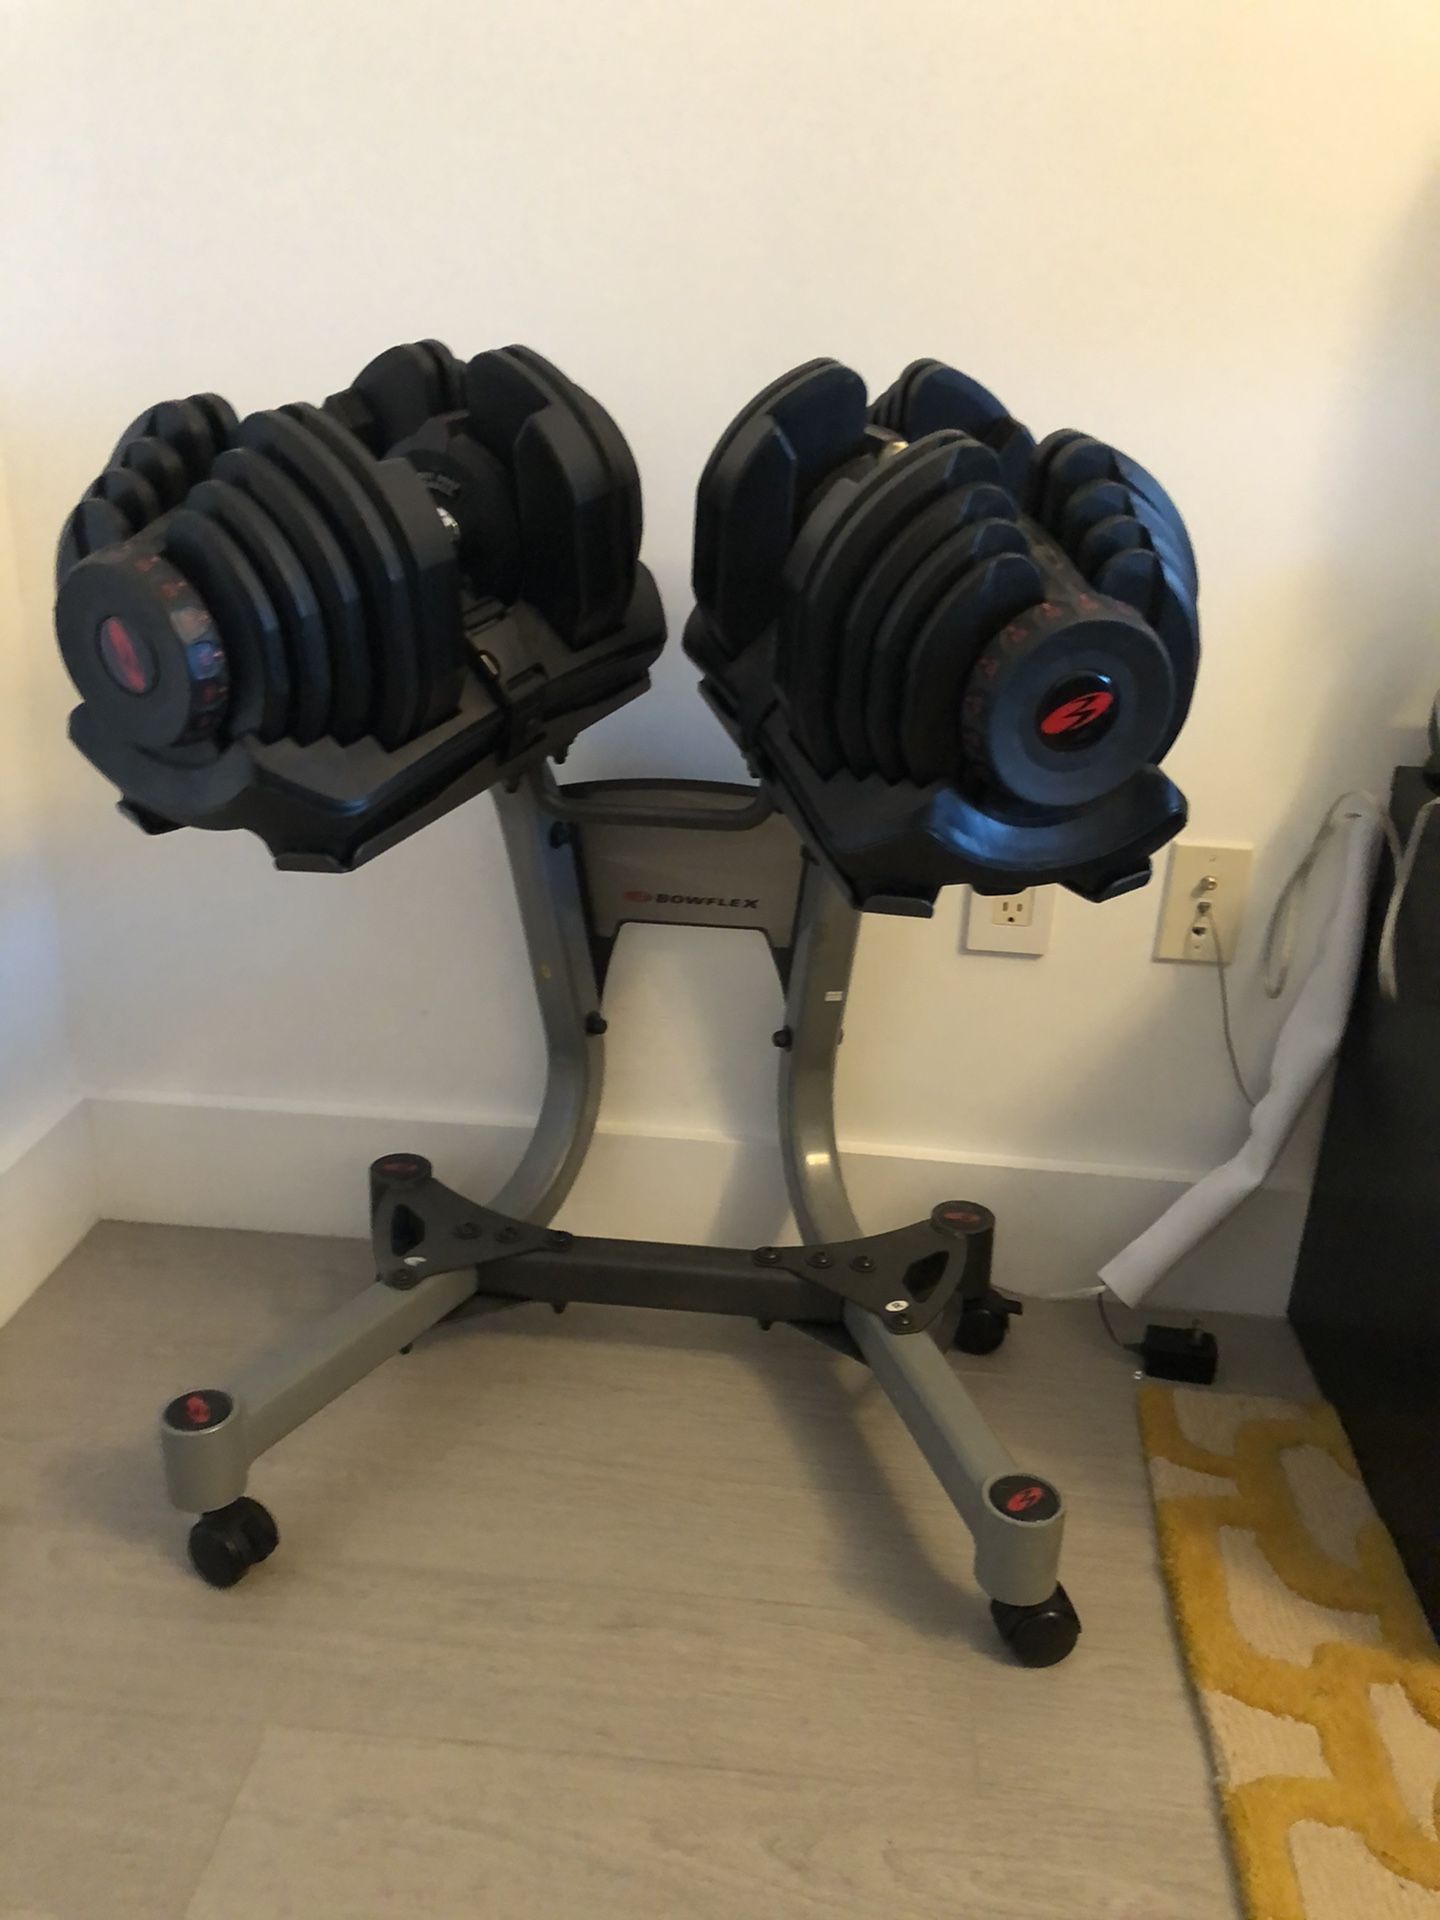 Bowflex adjustable dumbbells 10 to 85 pounds with stand